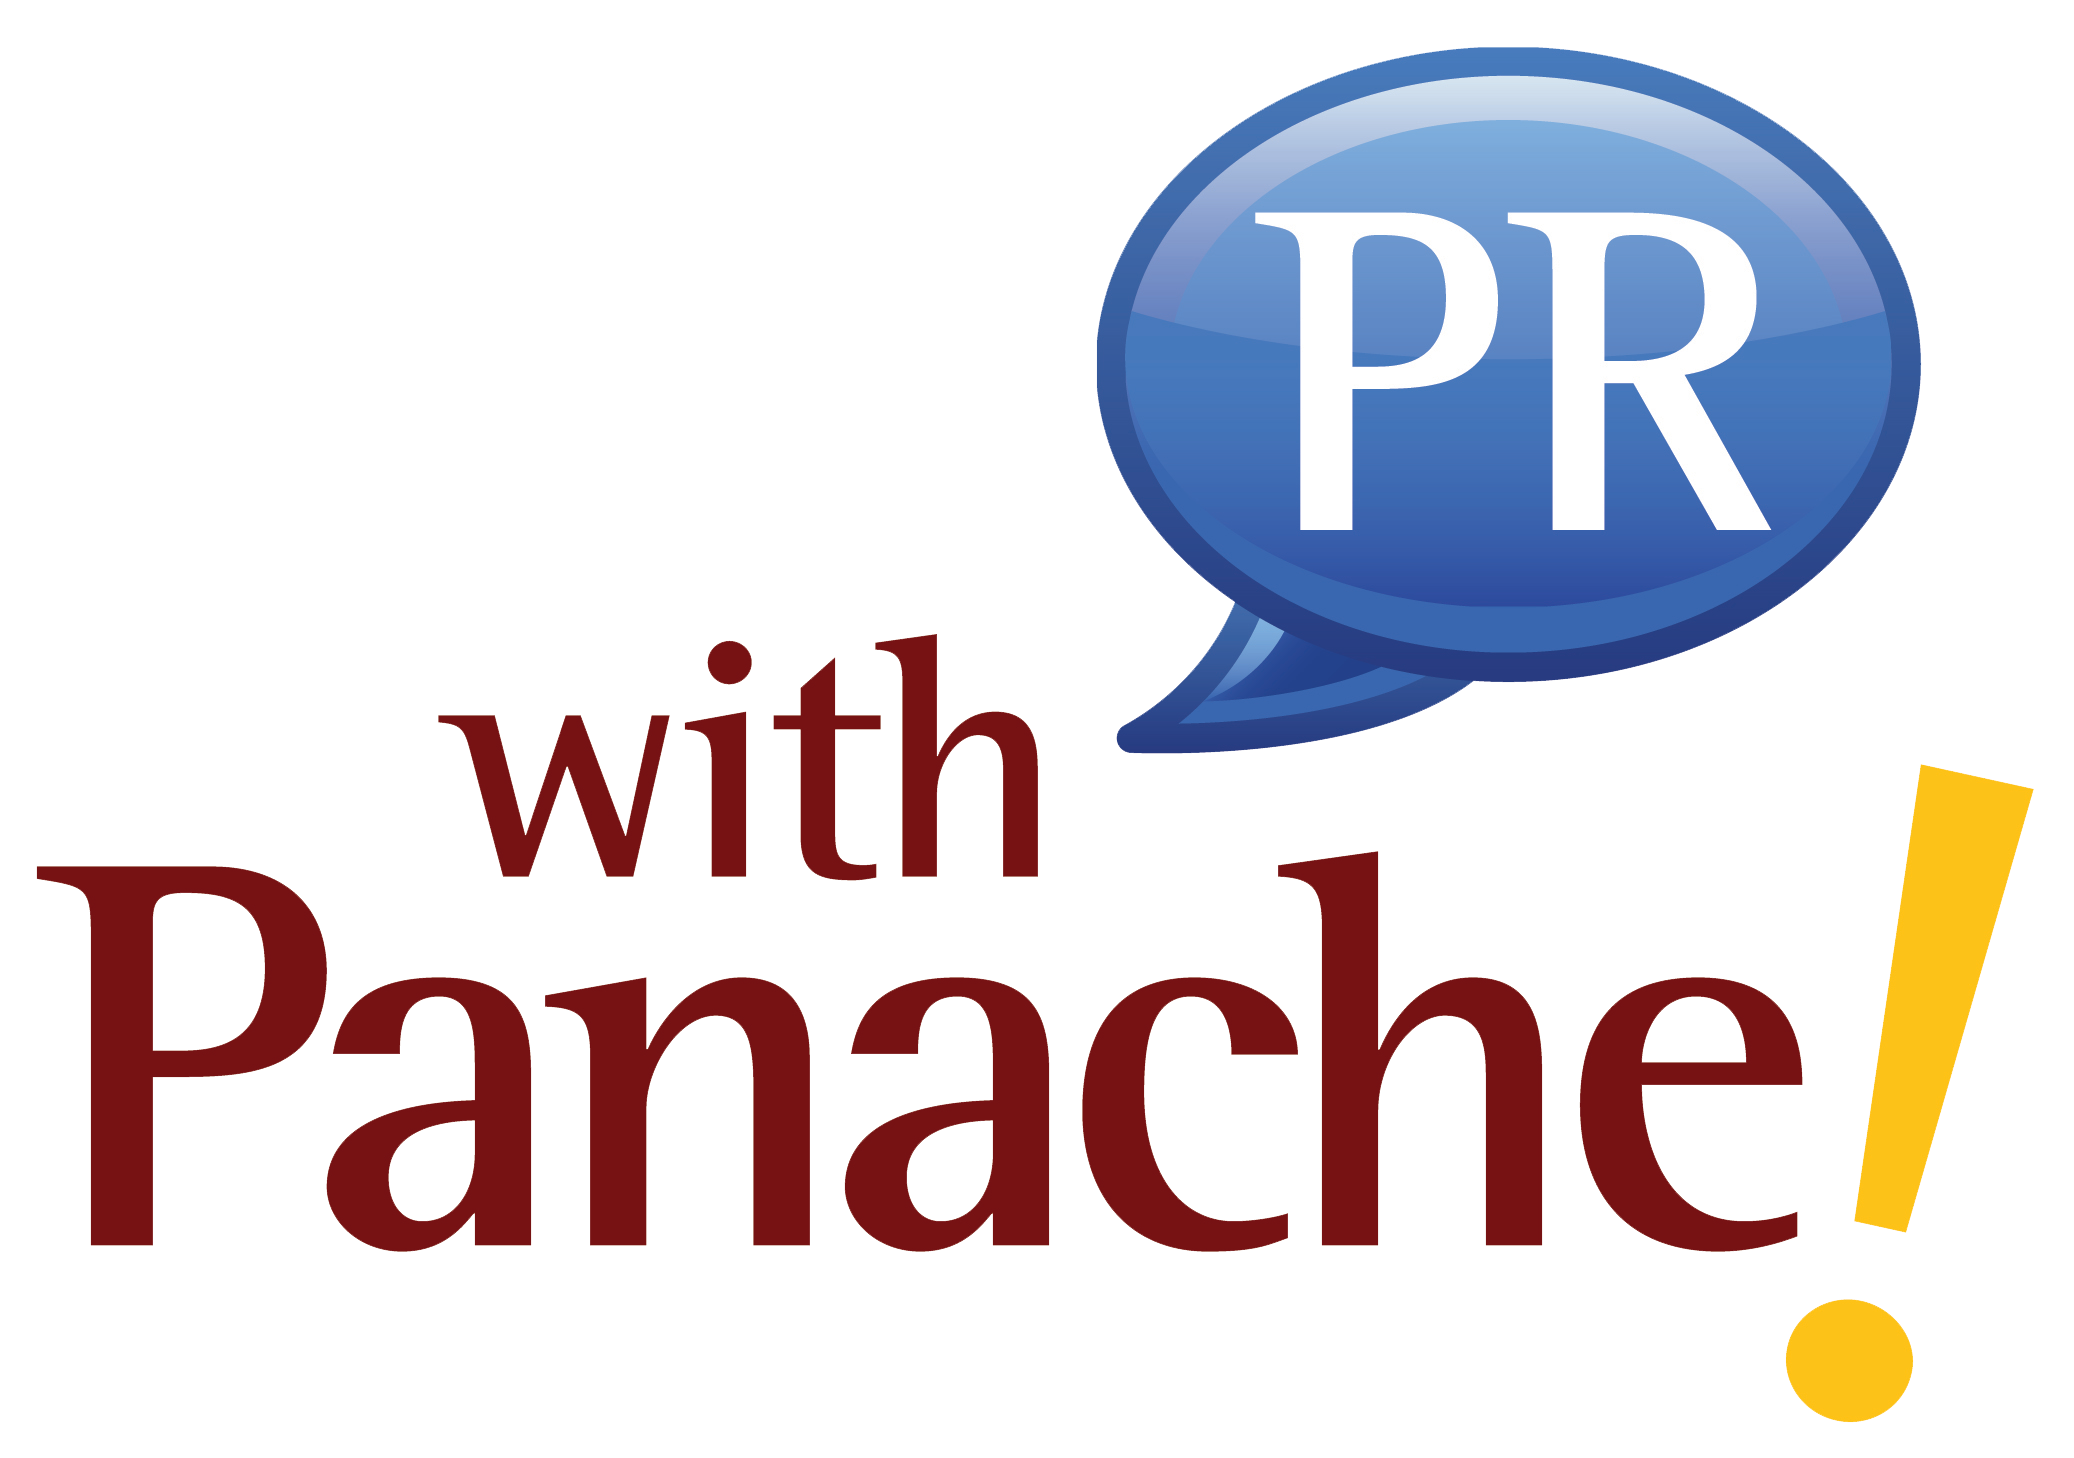 PR with Panache! Wins ‘Agency of the Year’ Award for the Second Consecutive Year